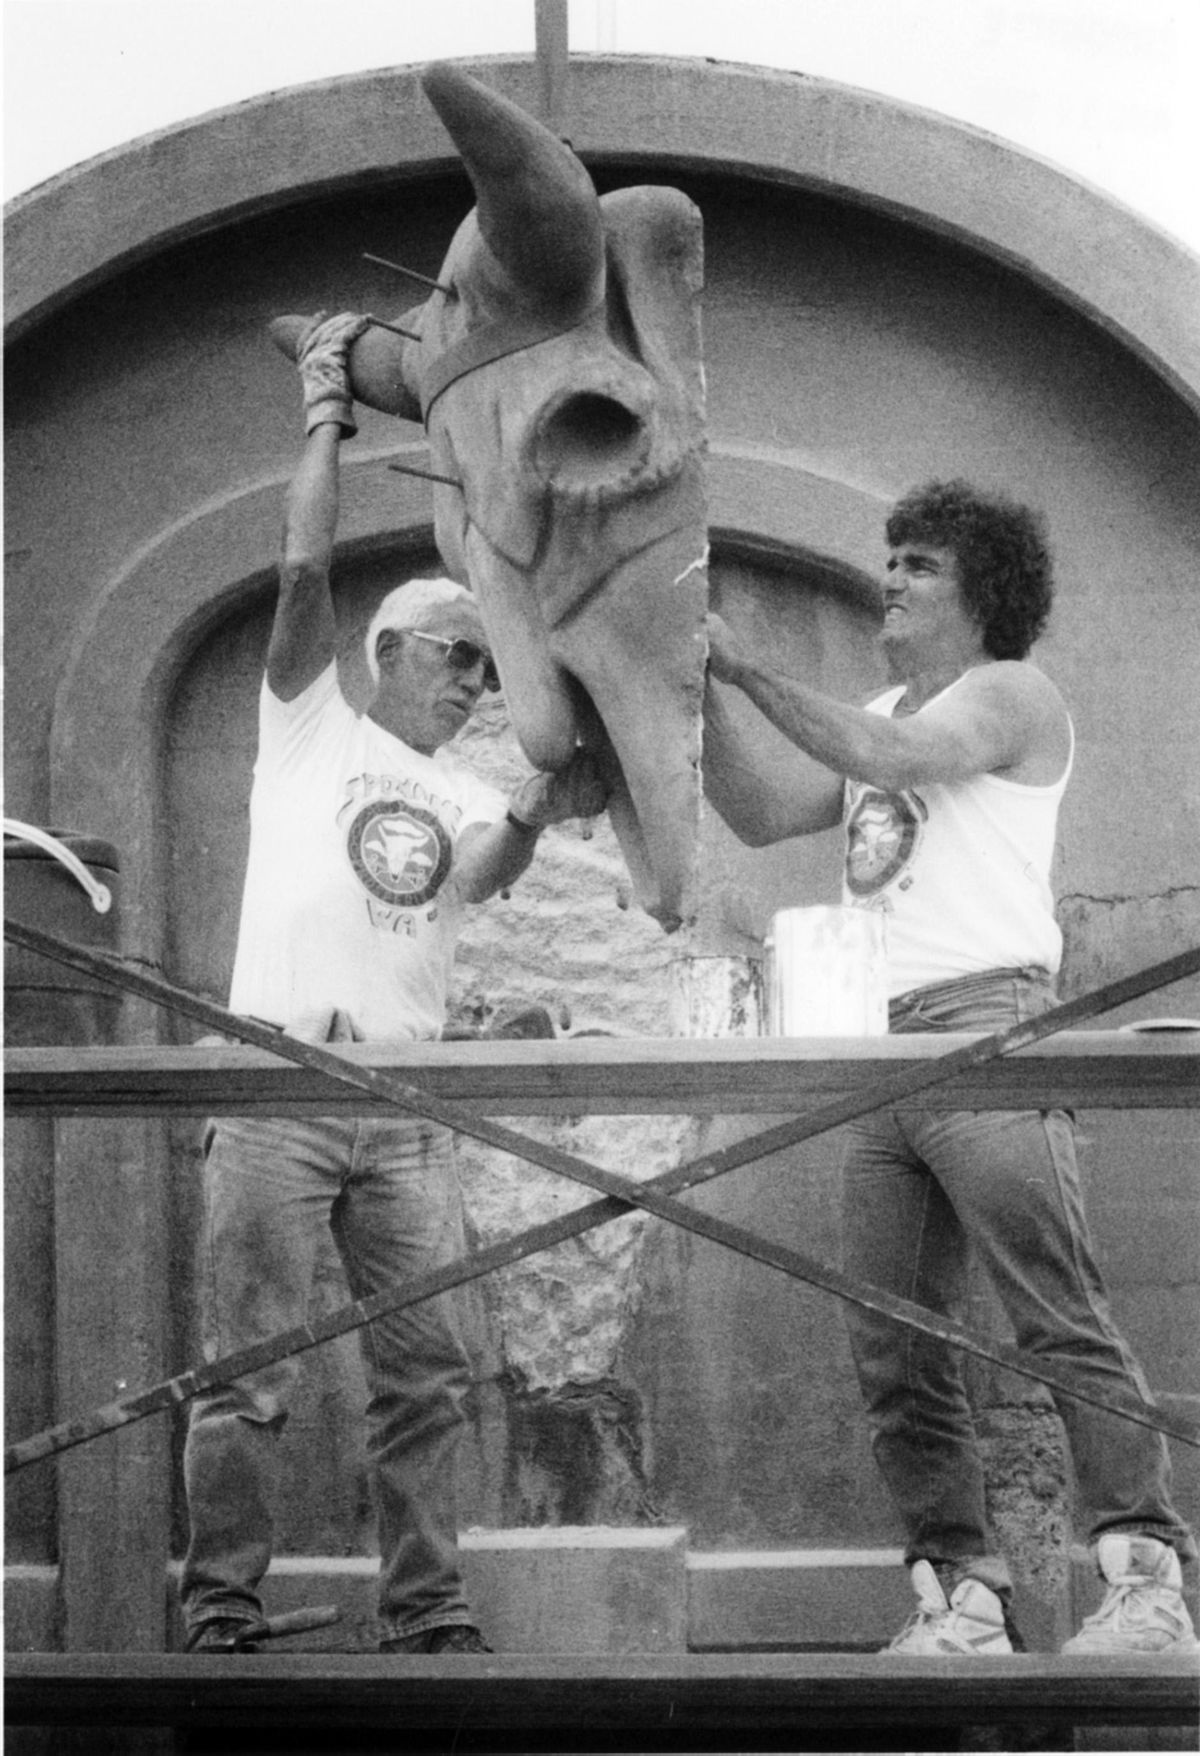 City employee Jack Fruit and sculptor Don Rodgers prepare to put a buffalo skull, created by Rodgers, in place on an archway on the Monroe Street Bridge in 1989. (Shawn Jacobson / The Spokesman-Review)